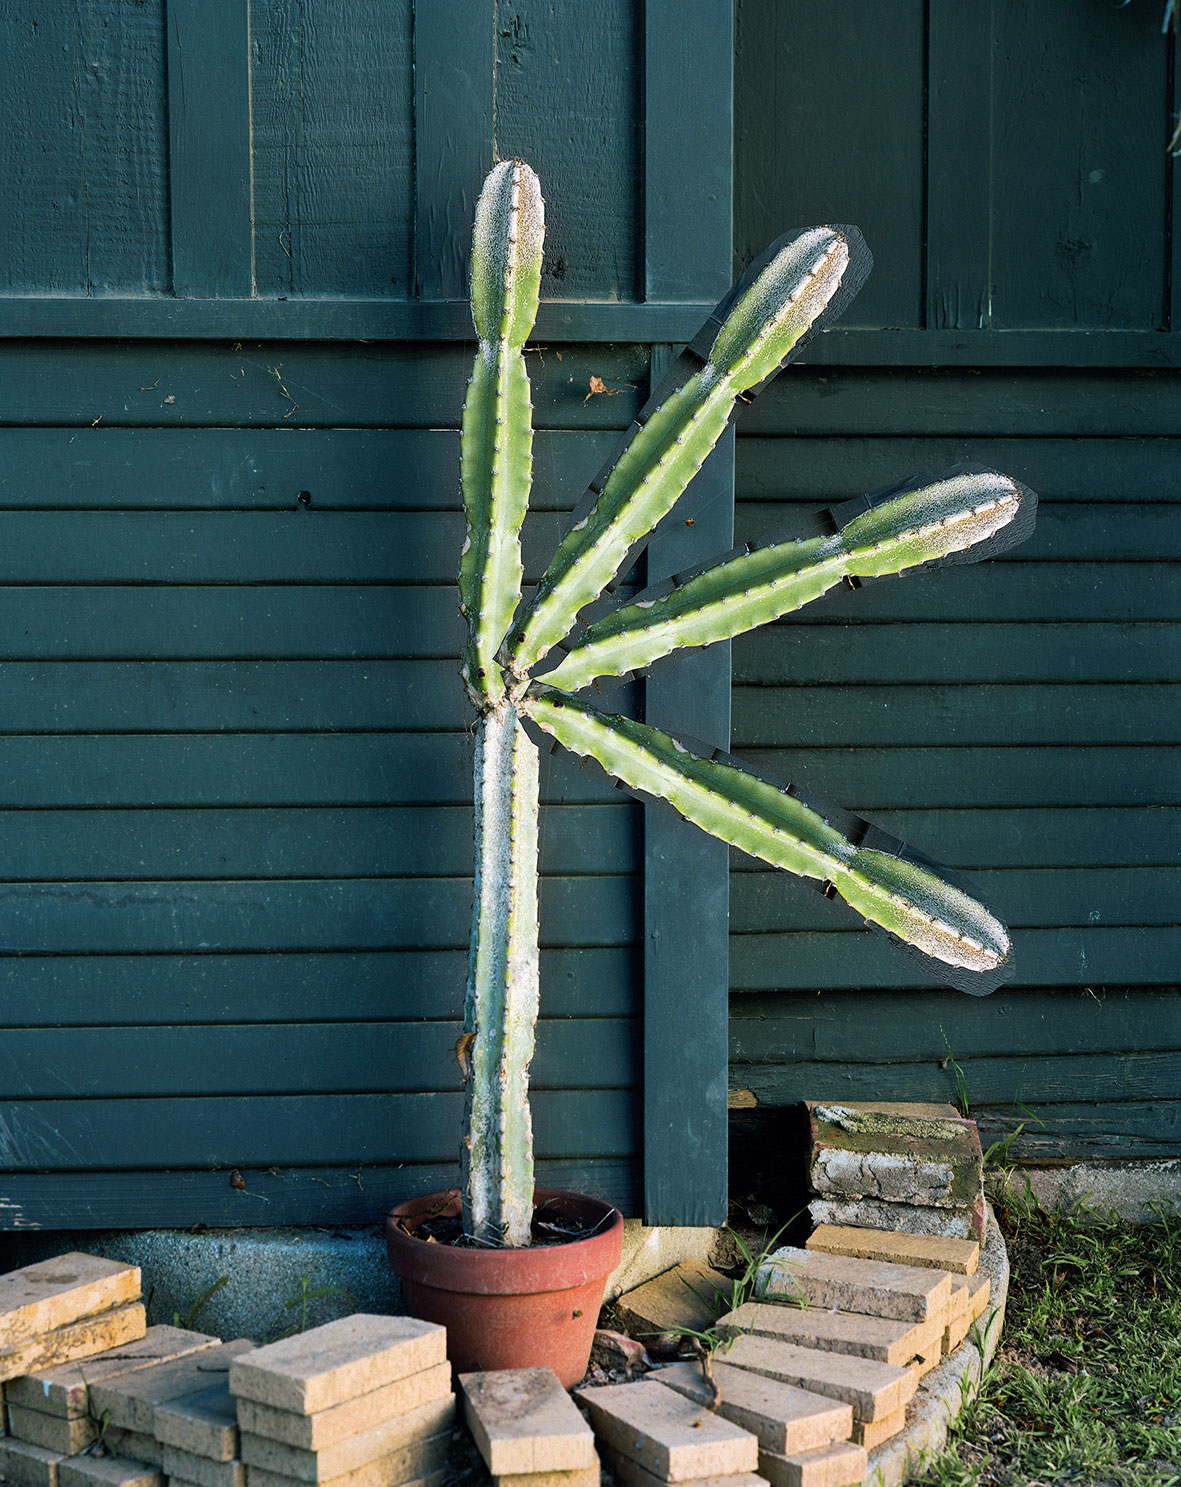 Cactus action, image courtesy of Erik Kessels. From Failed It!